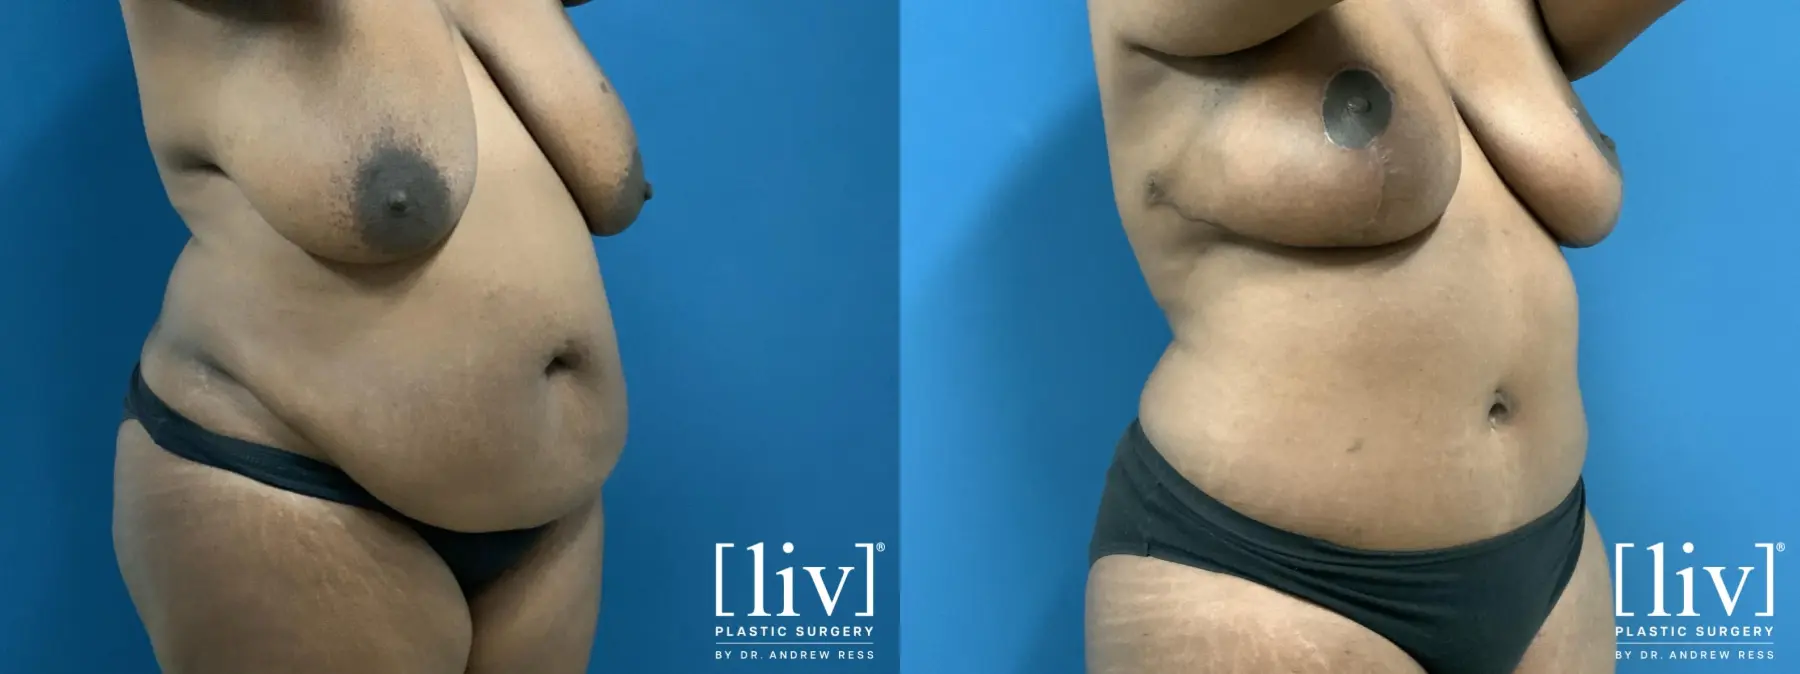 Lipoabdominoplasty - Before and After 4